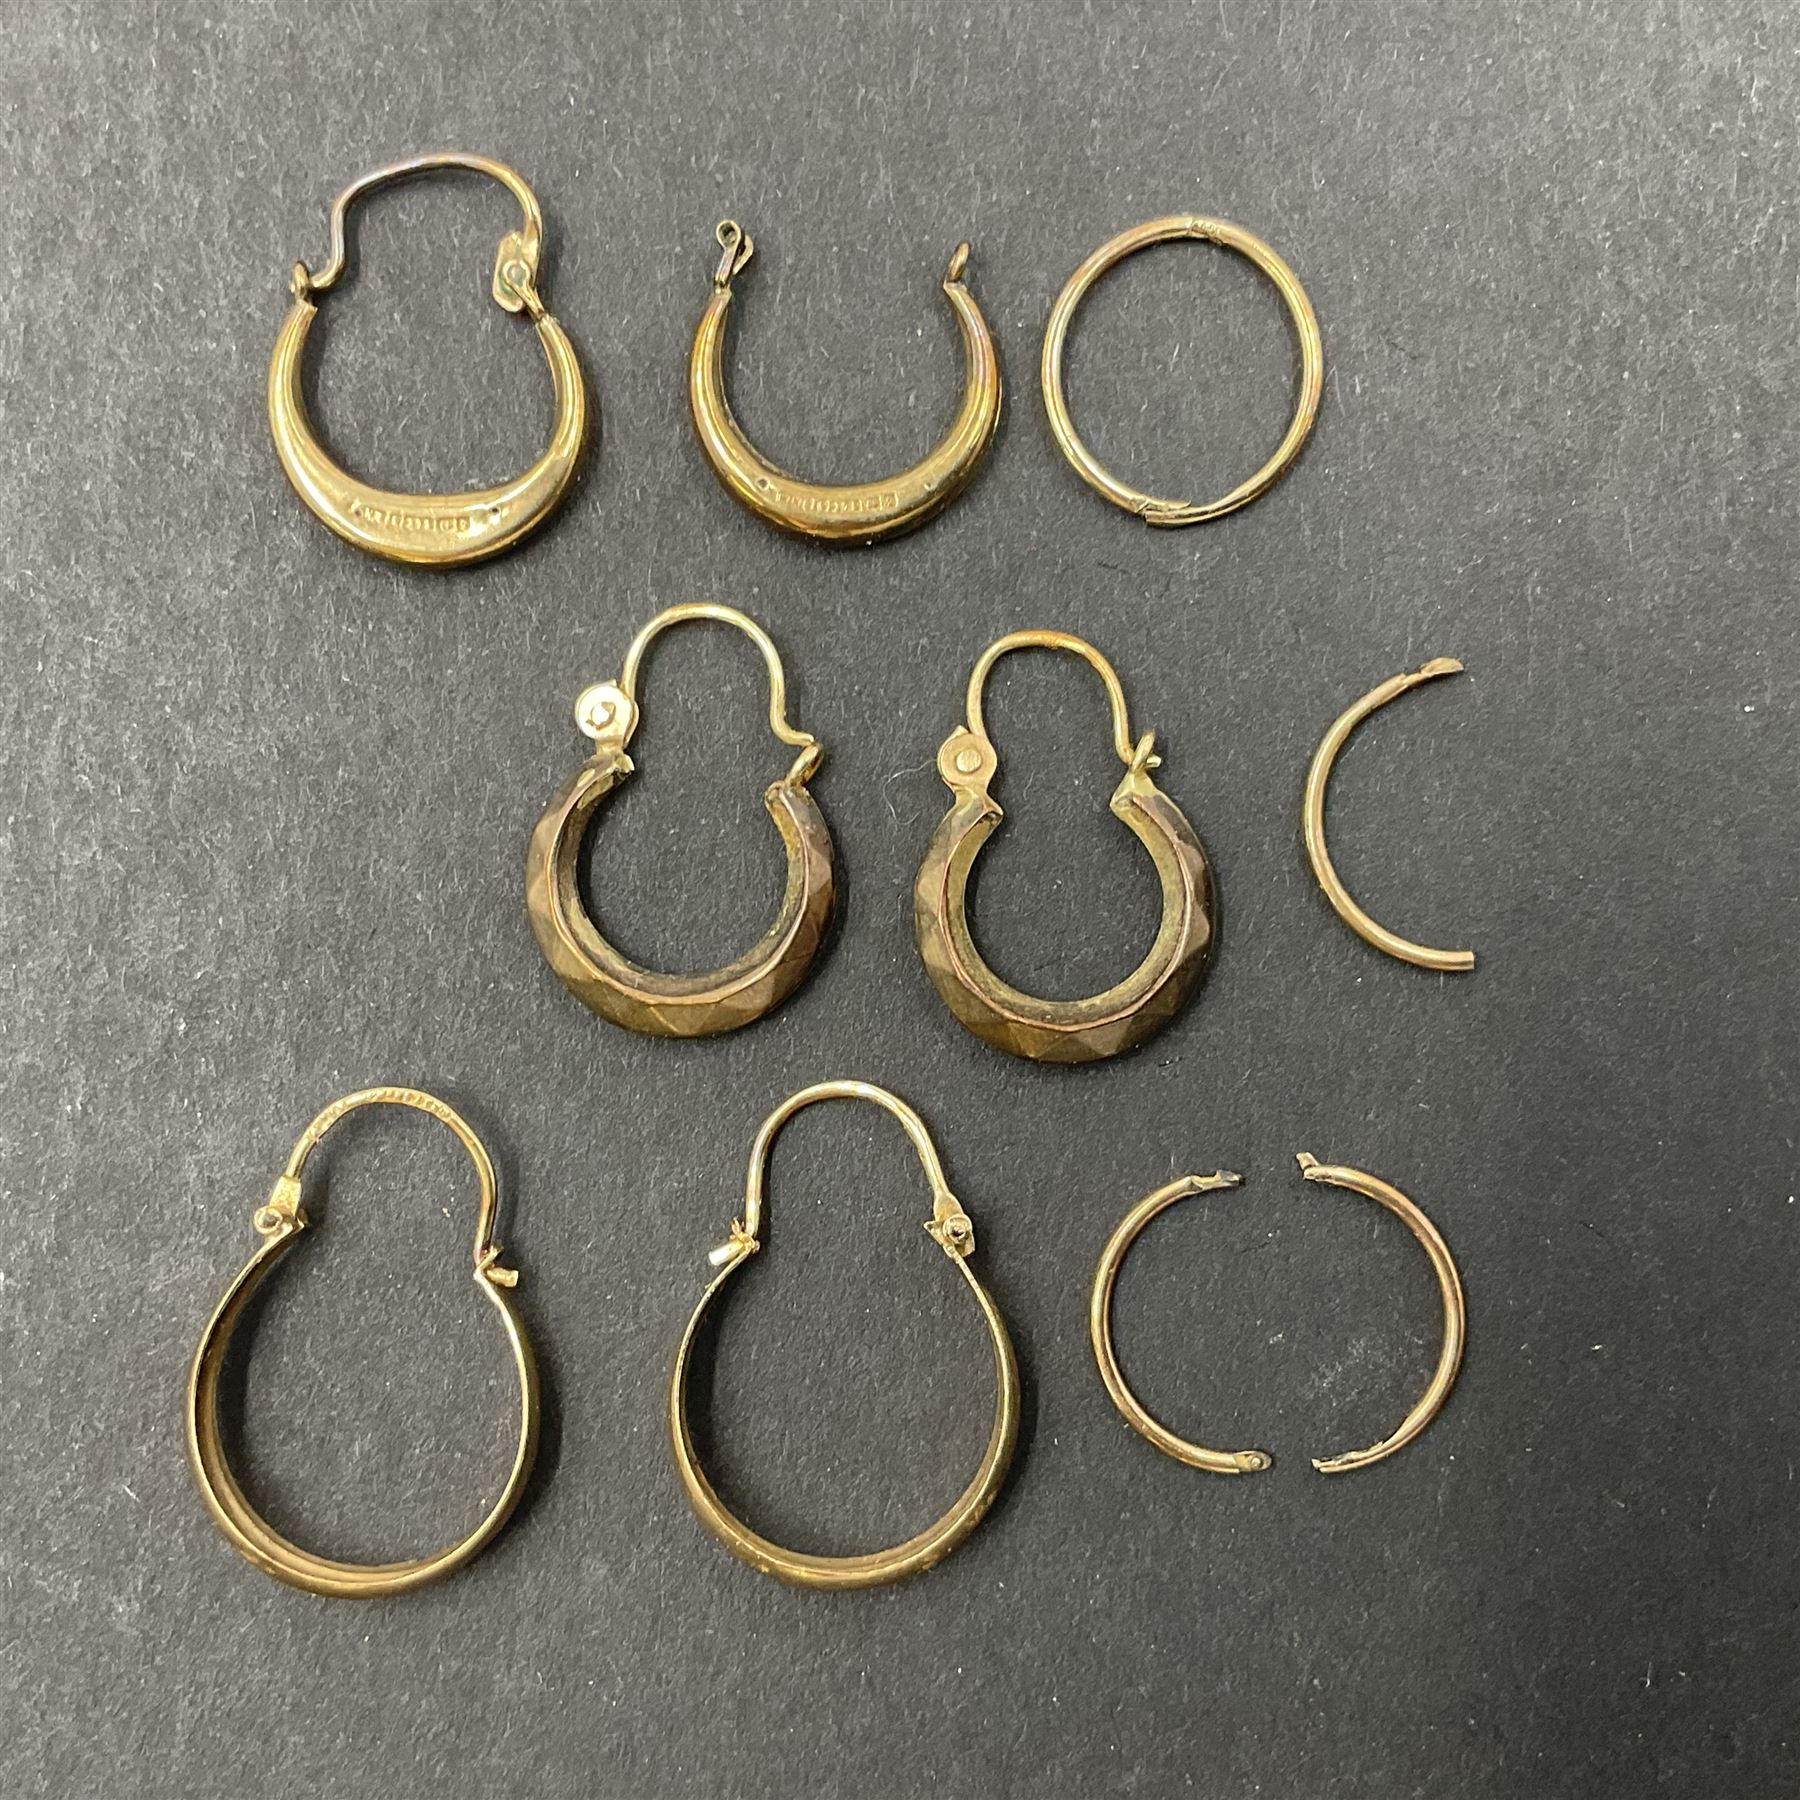 Two pairs of 9ct gold hoop earrings and 9ct gold earring oddments - Image 2 of 10